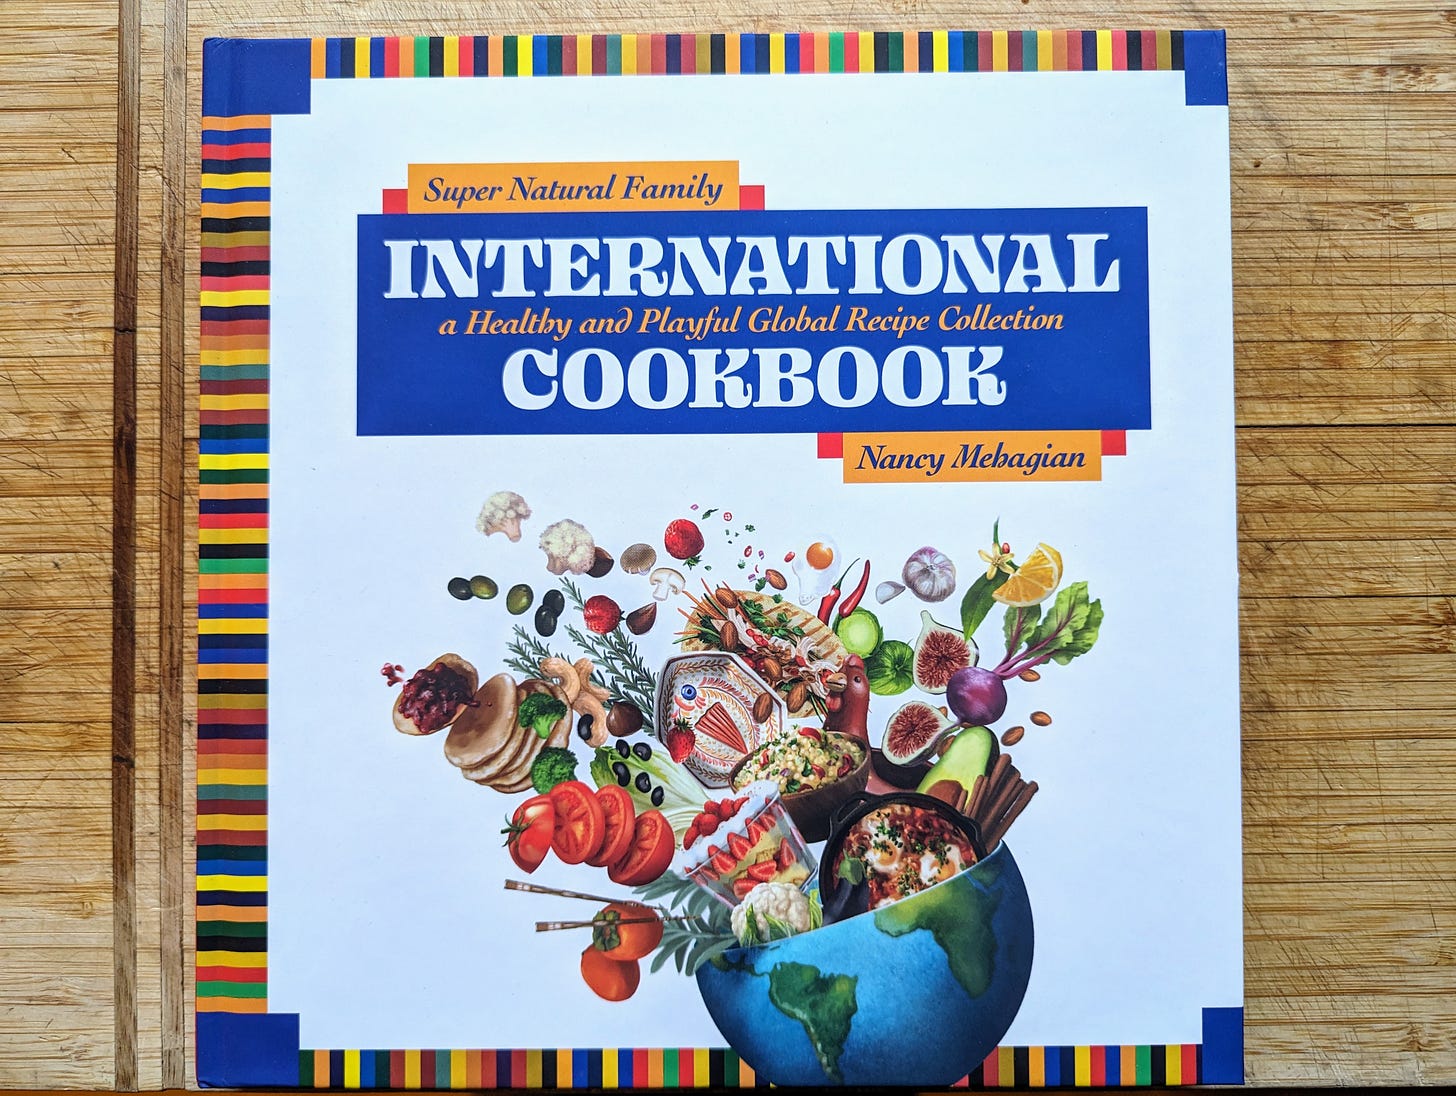 A picture of the Super Natural Family International Cookbook by Nancy Mehagian.